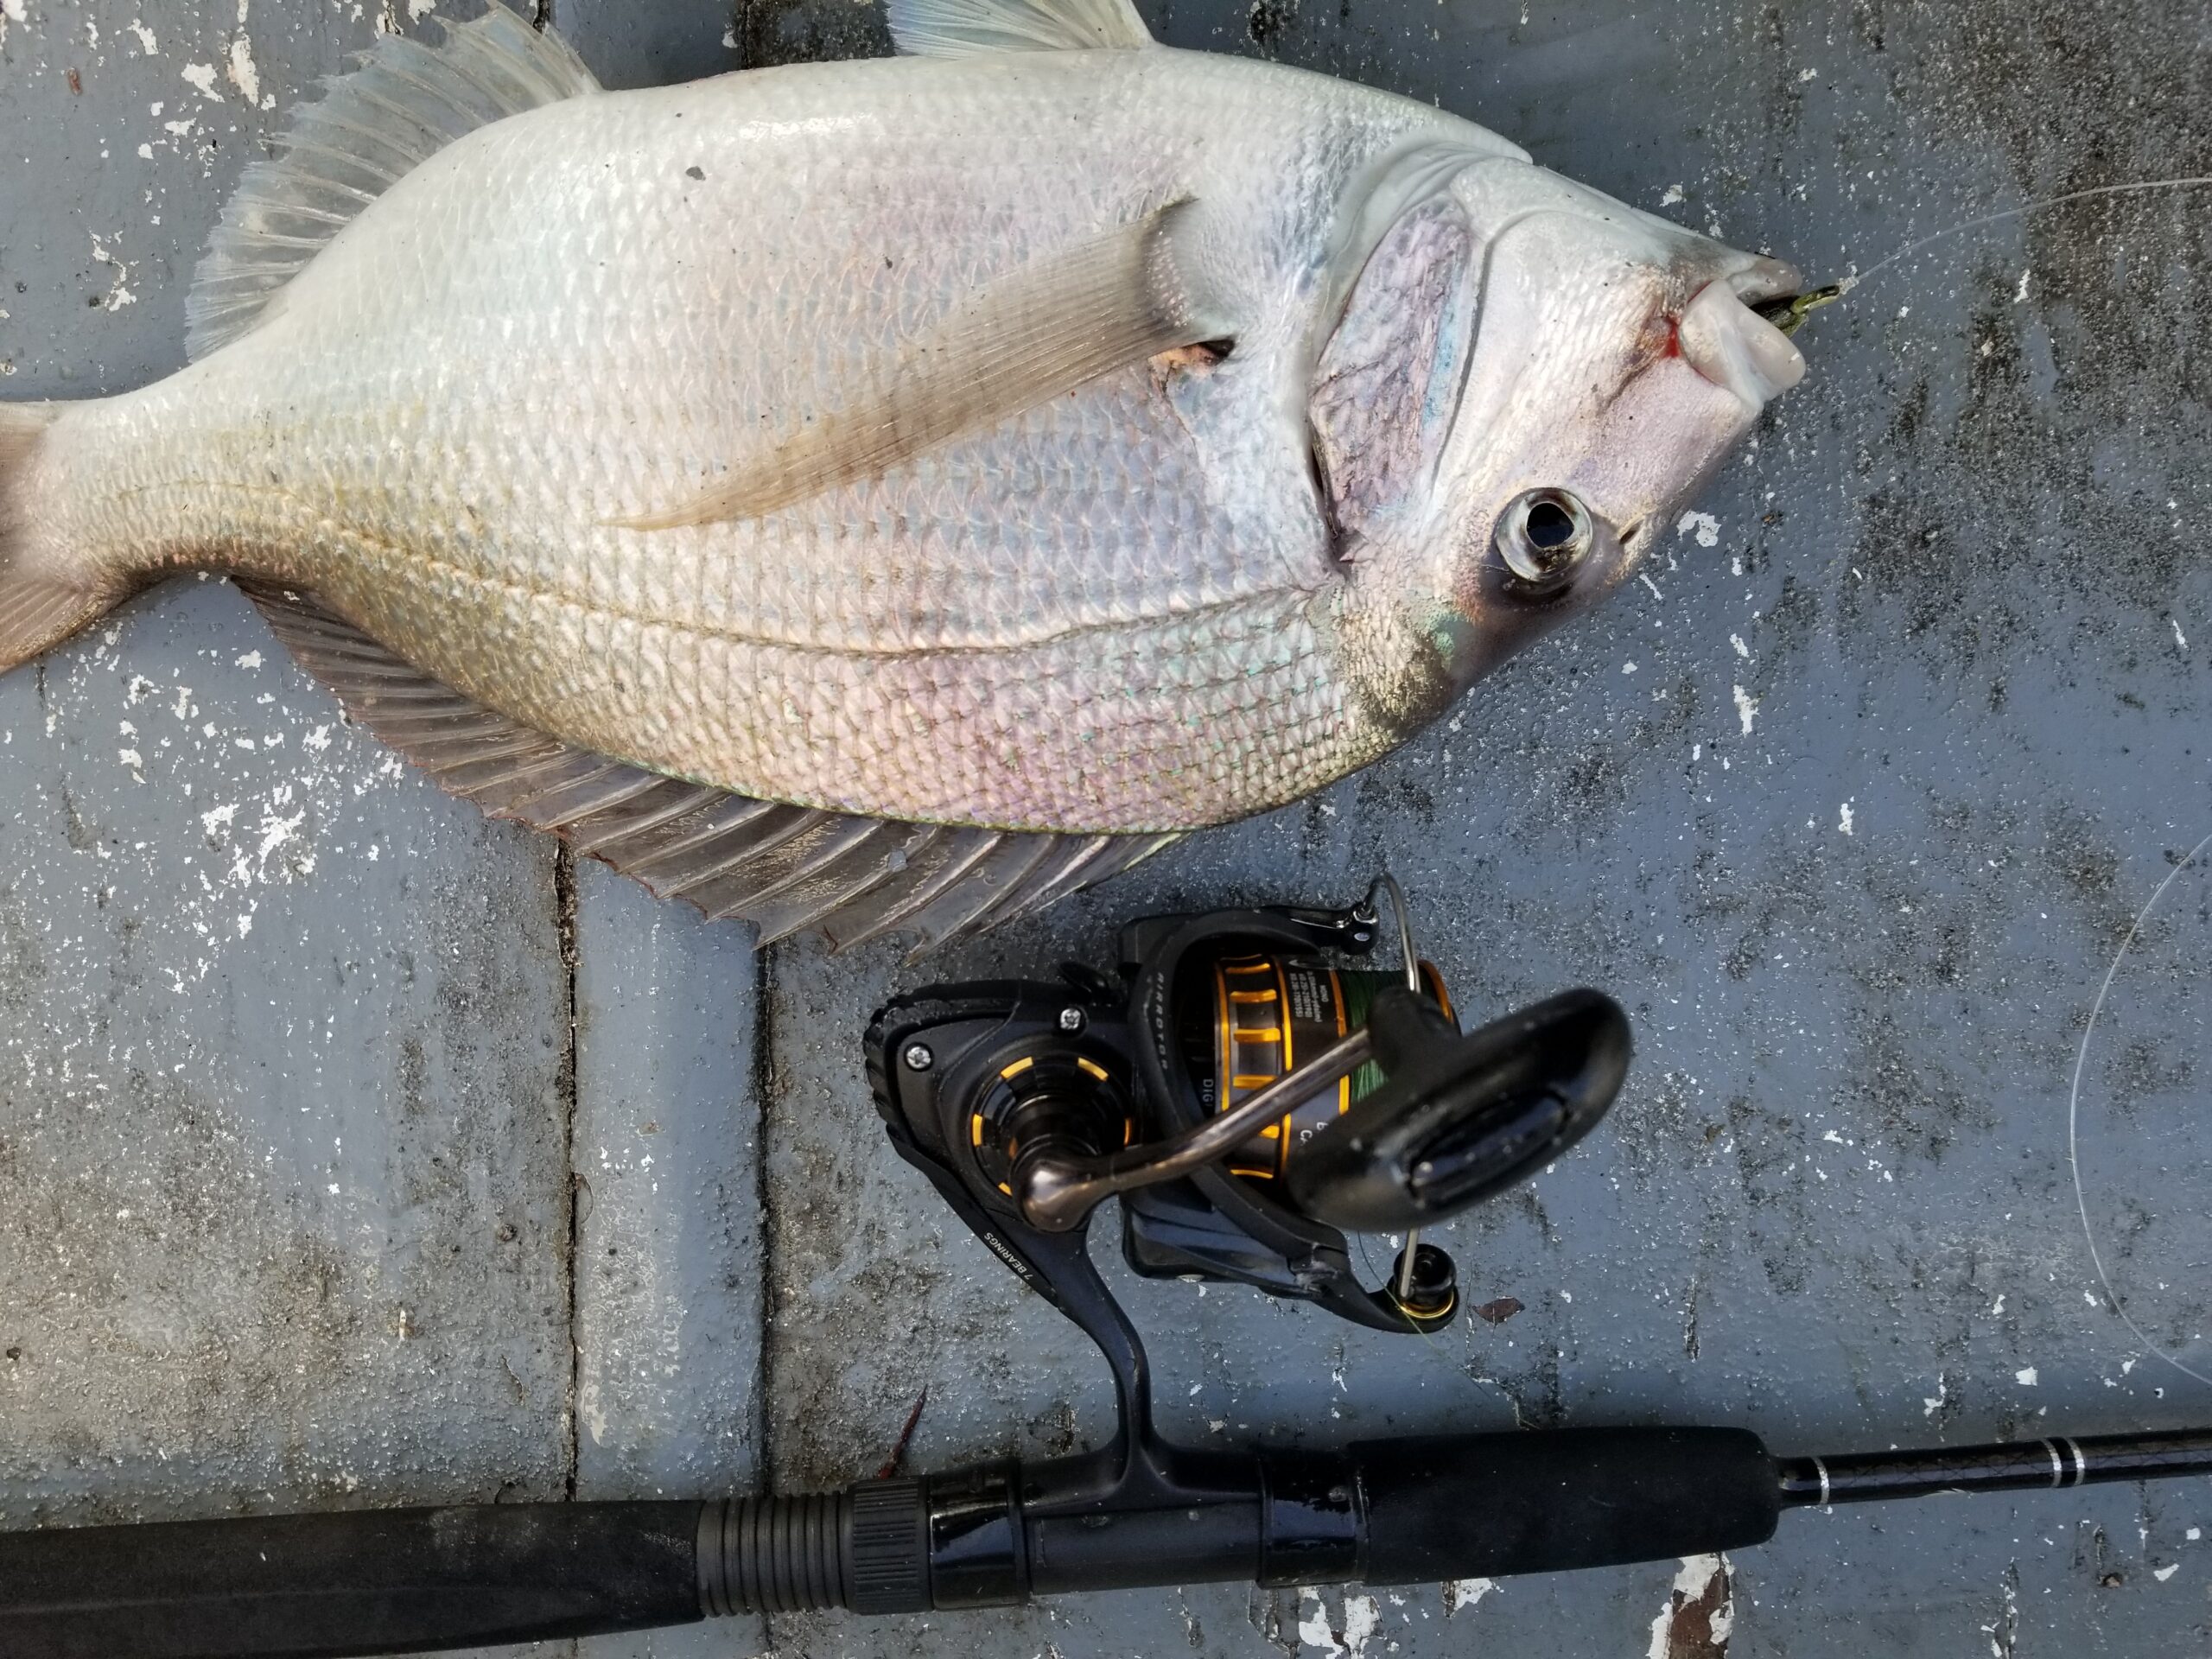 Flounder fishing with a vintage Daiwa 730 reel and reel